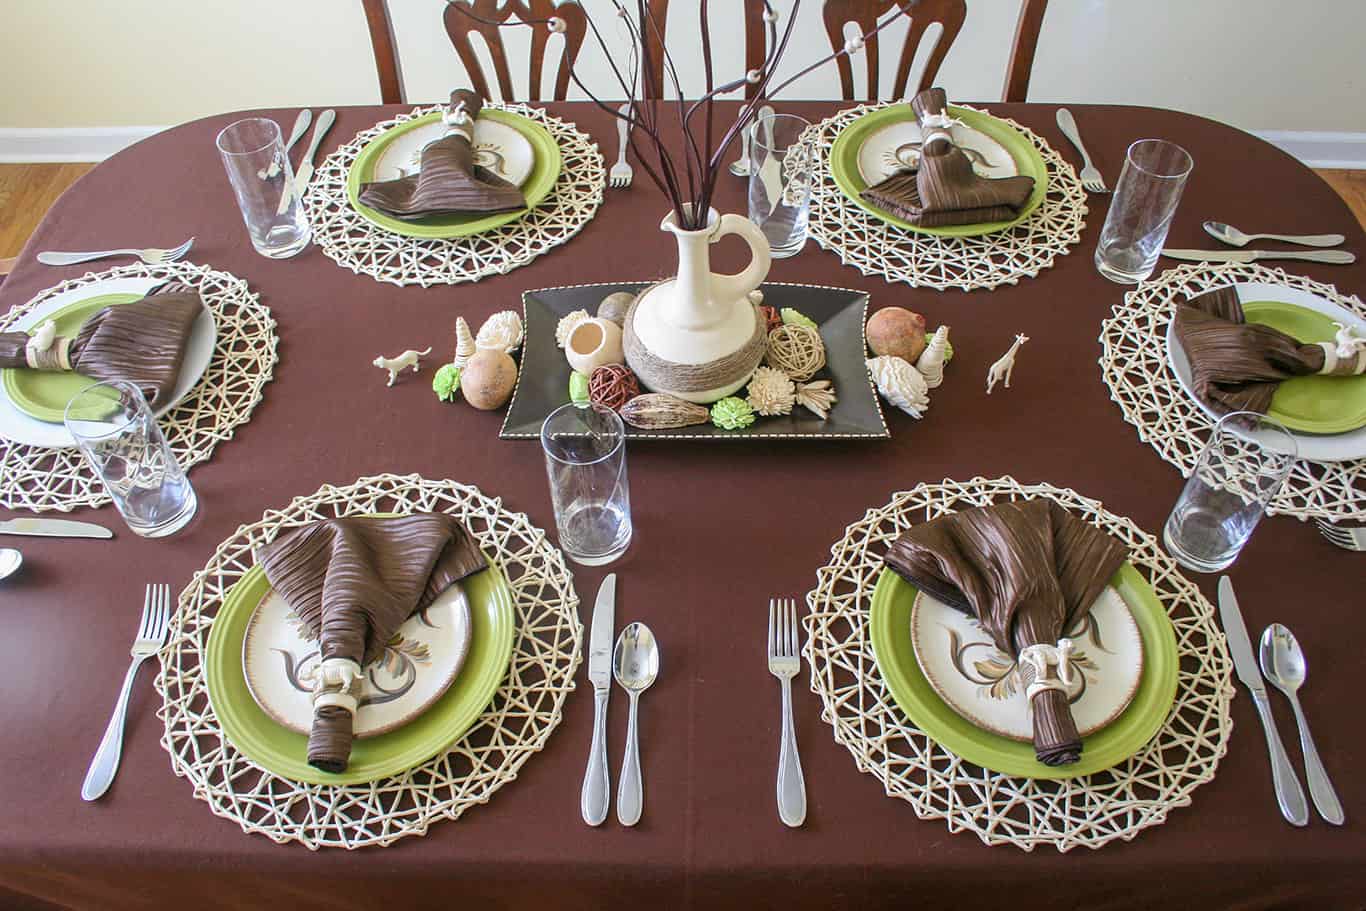 Safari table setting. Overhead view of table with brown tablecloth and safari themed place settings